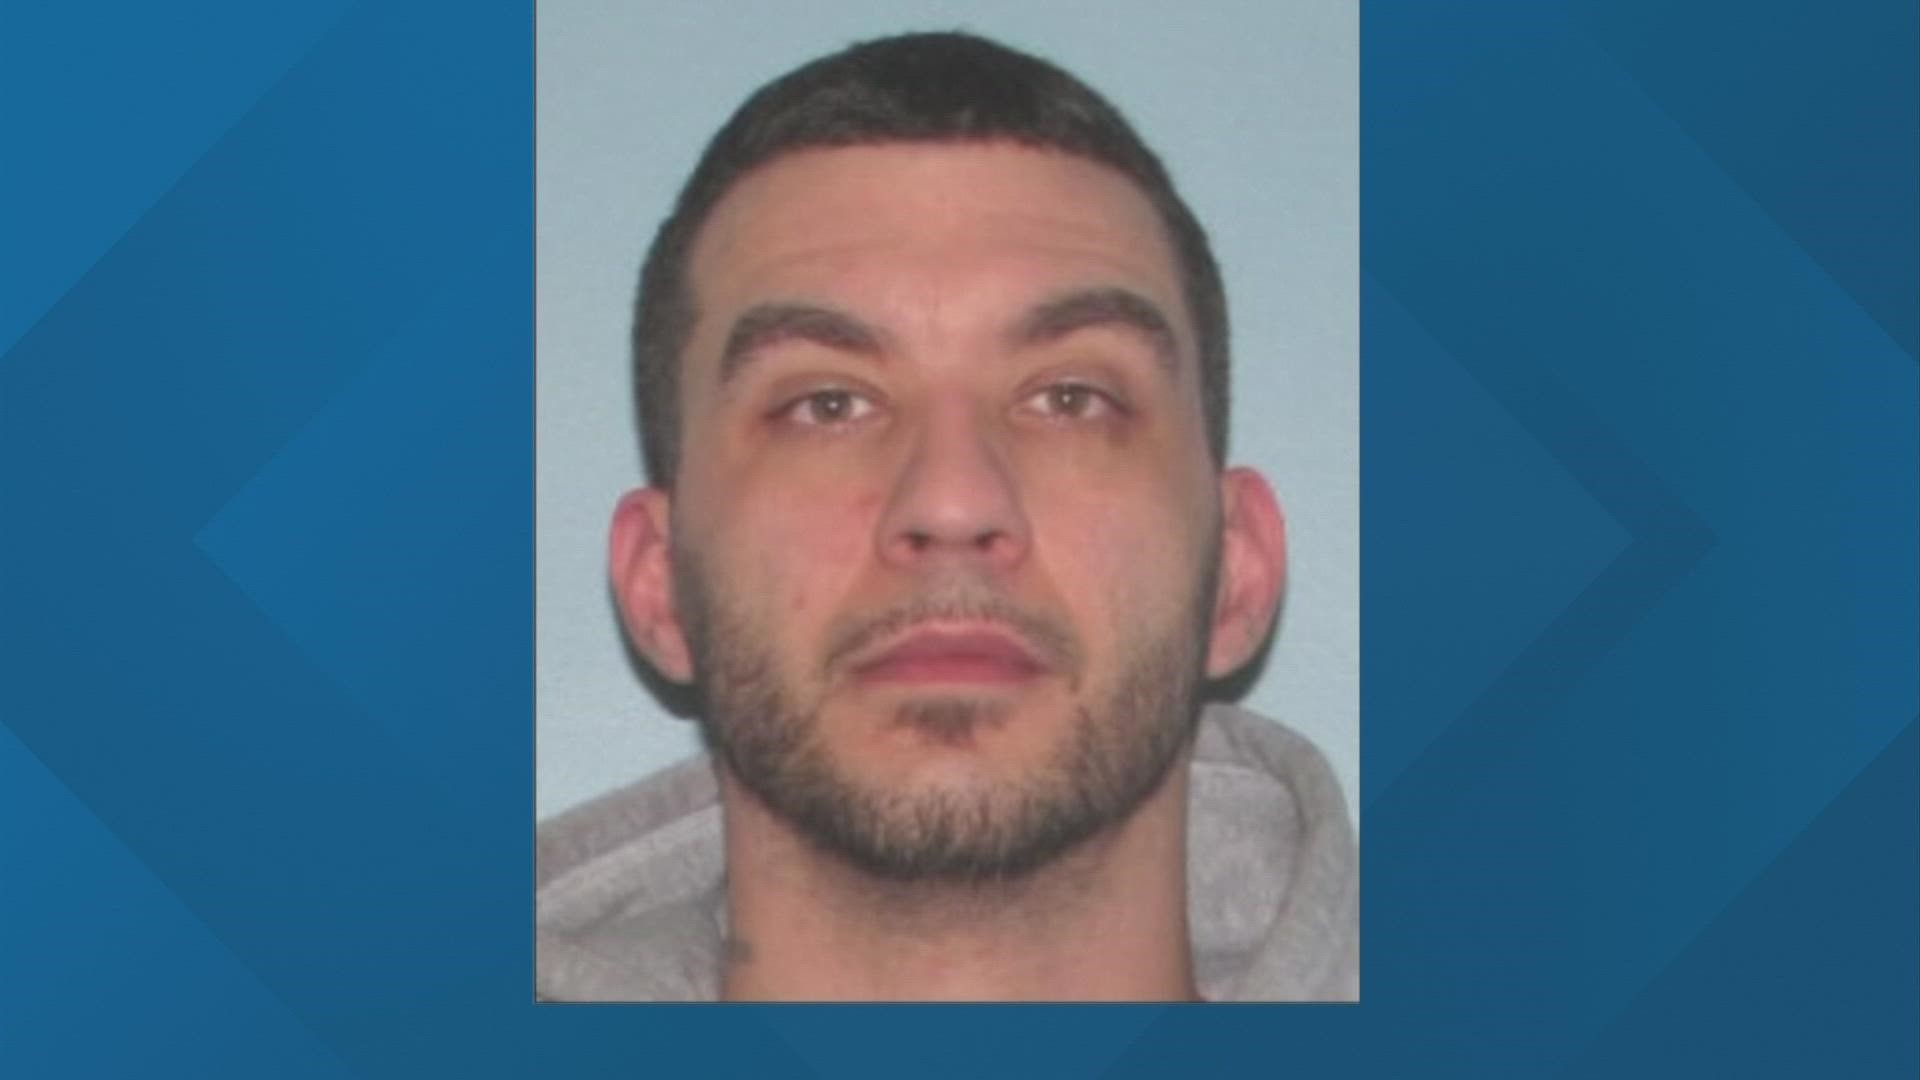 Police were serving a felony arrest warrant for Brandon Steele at a home in the 700 block of Lynn Street when Steele reportedly took off running.